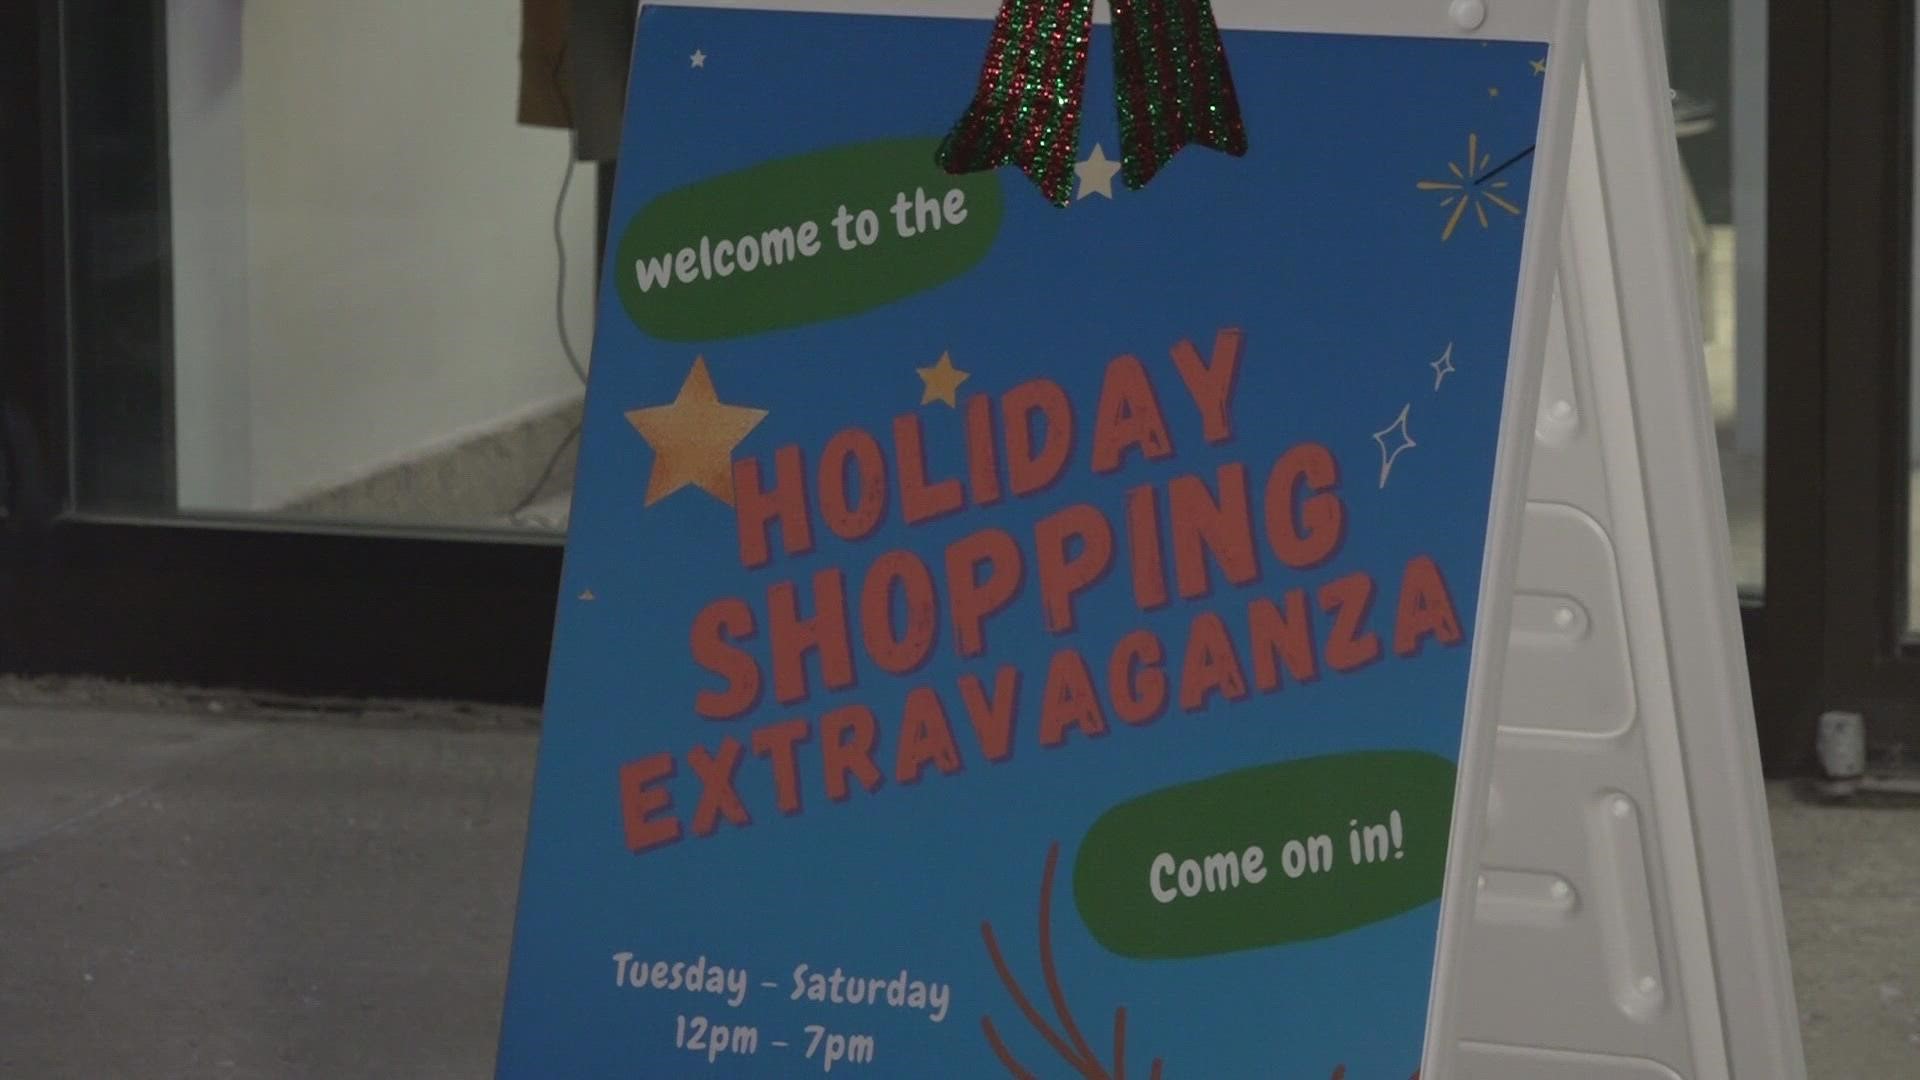 Shop local. That's the message one Grand Rapids business owner has for people this holiday season.